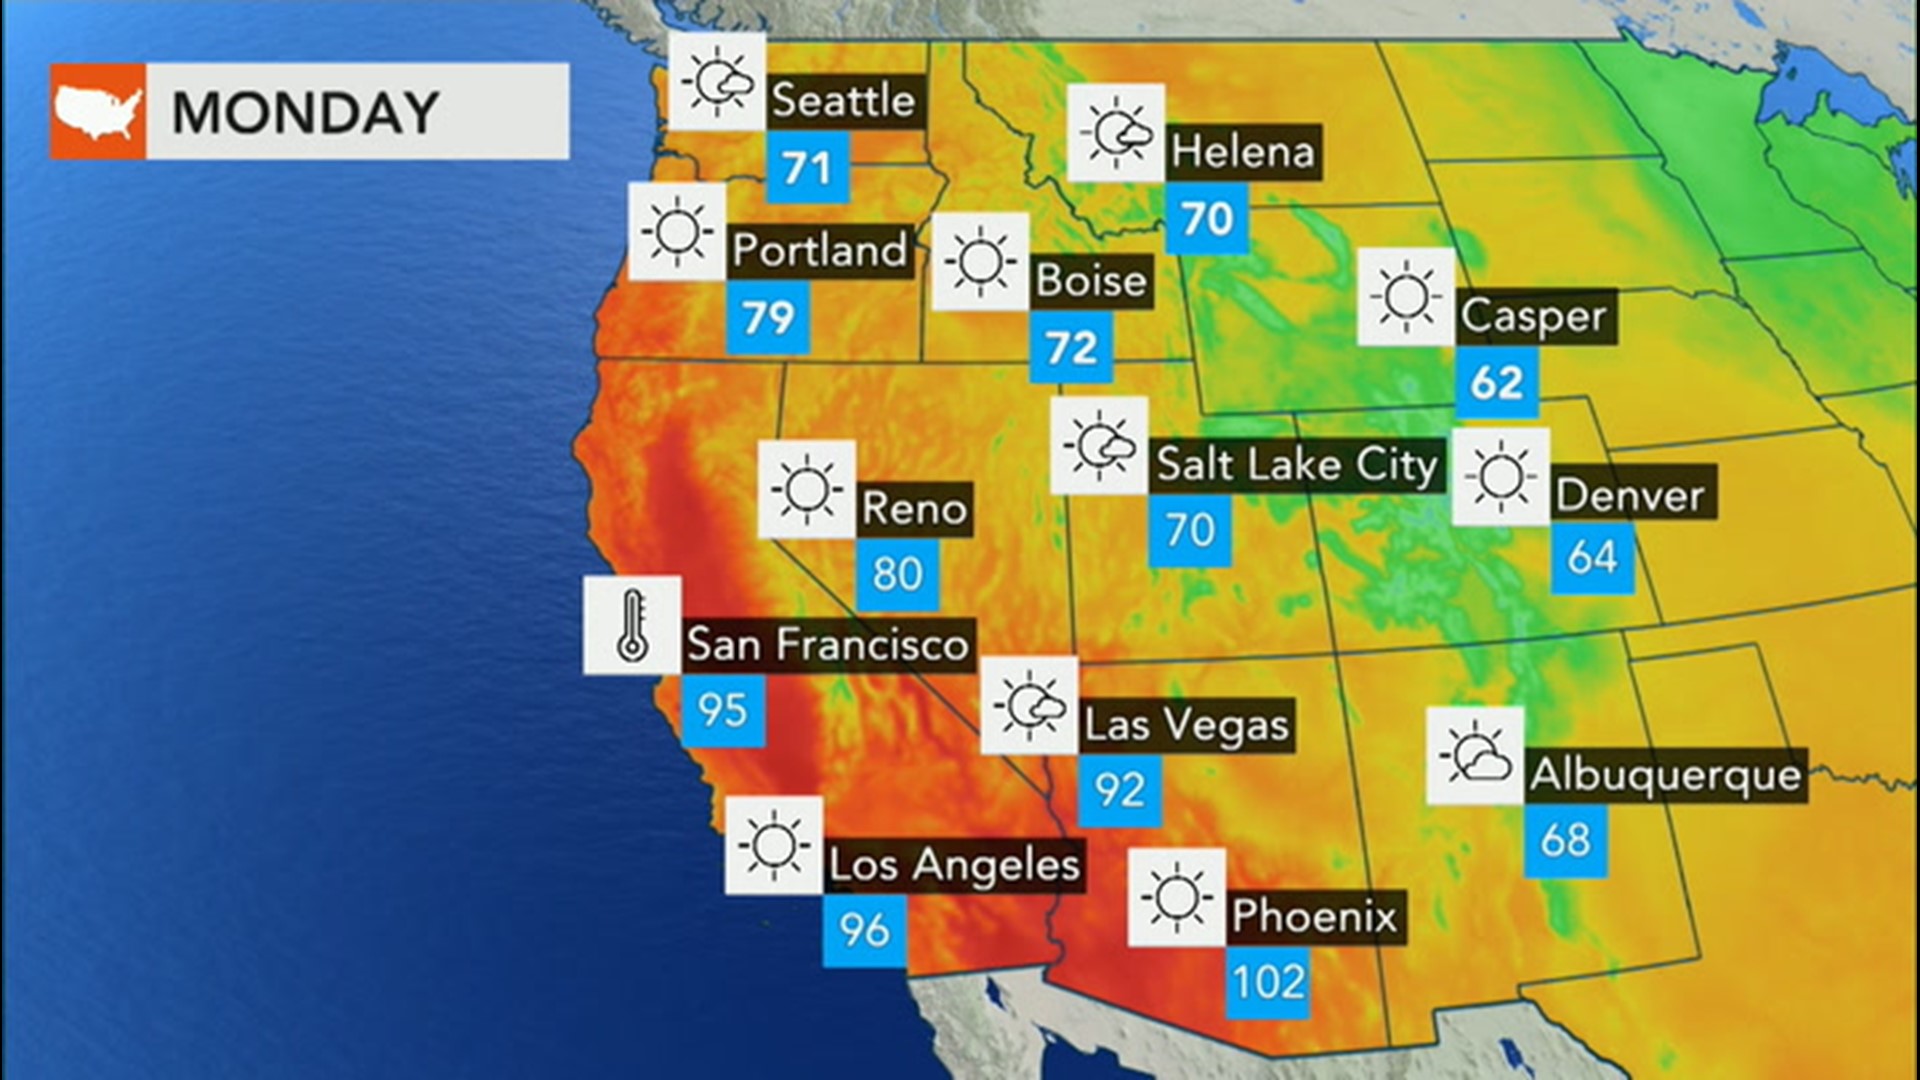 A heat dome is setting up across the West, which will worsen drought conditions and also challenge record highs.